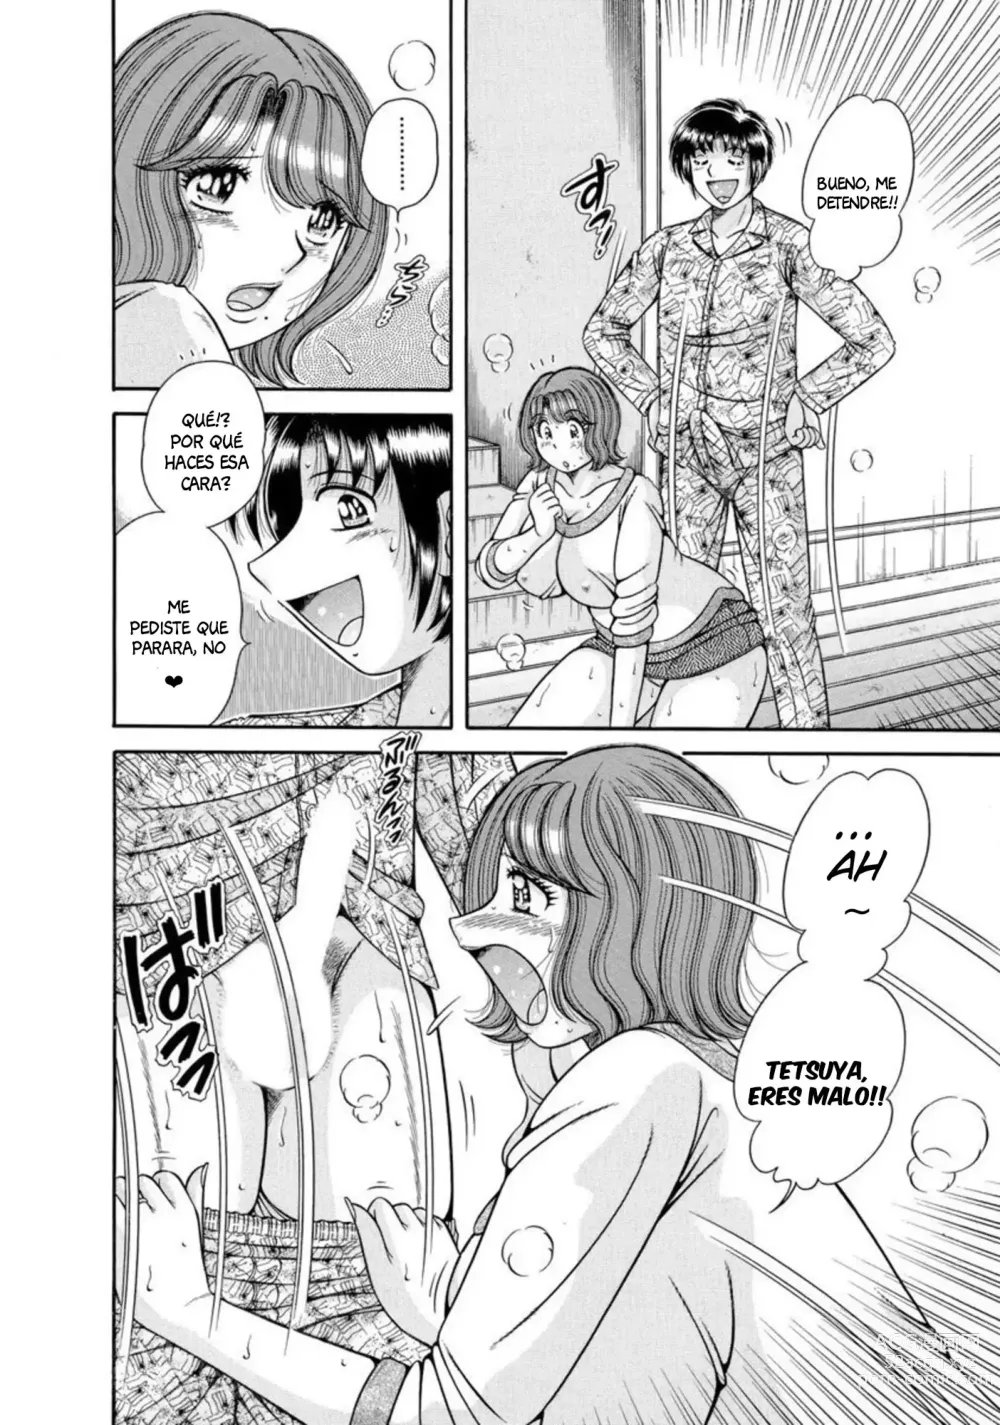 Page 5 of manga Mother and Big and Little Sisters. As Much Sex as You Want, Every Day, With All 5 of Them. Part 2